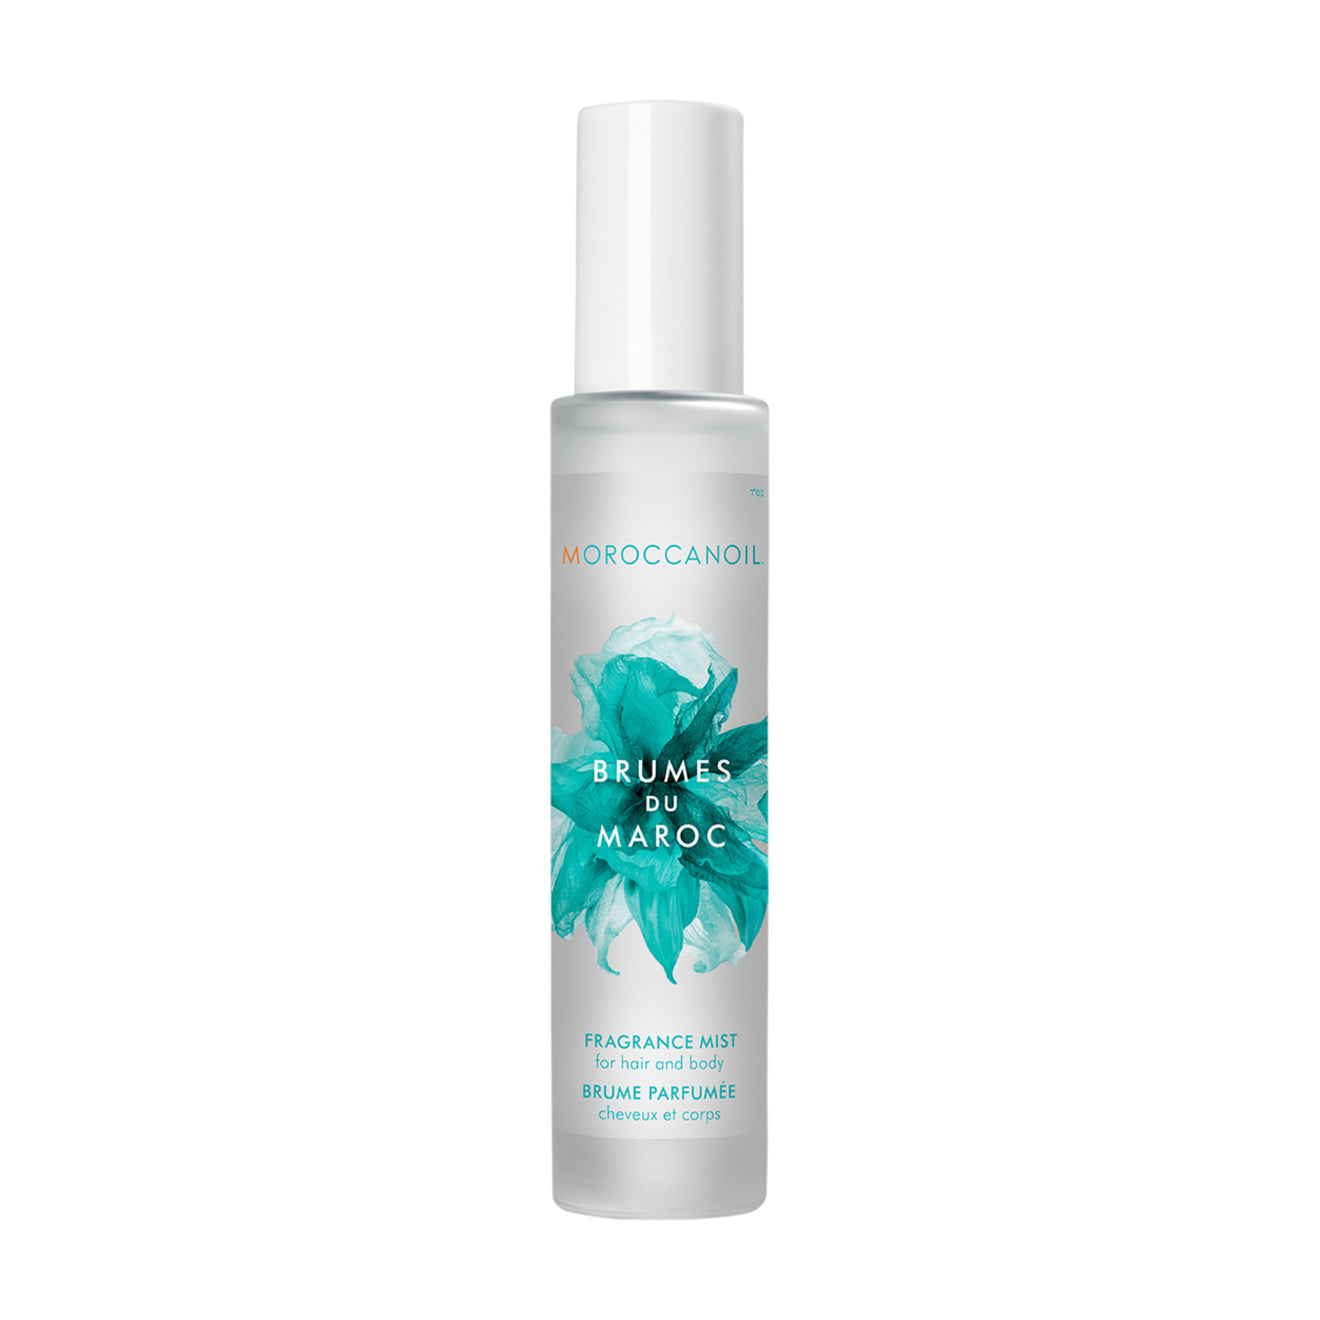 Moroccanoil Hair and Body Fragrance Mist Size variant: 100 ml main image.